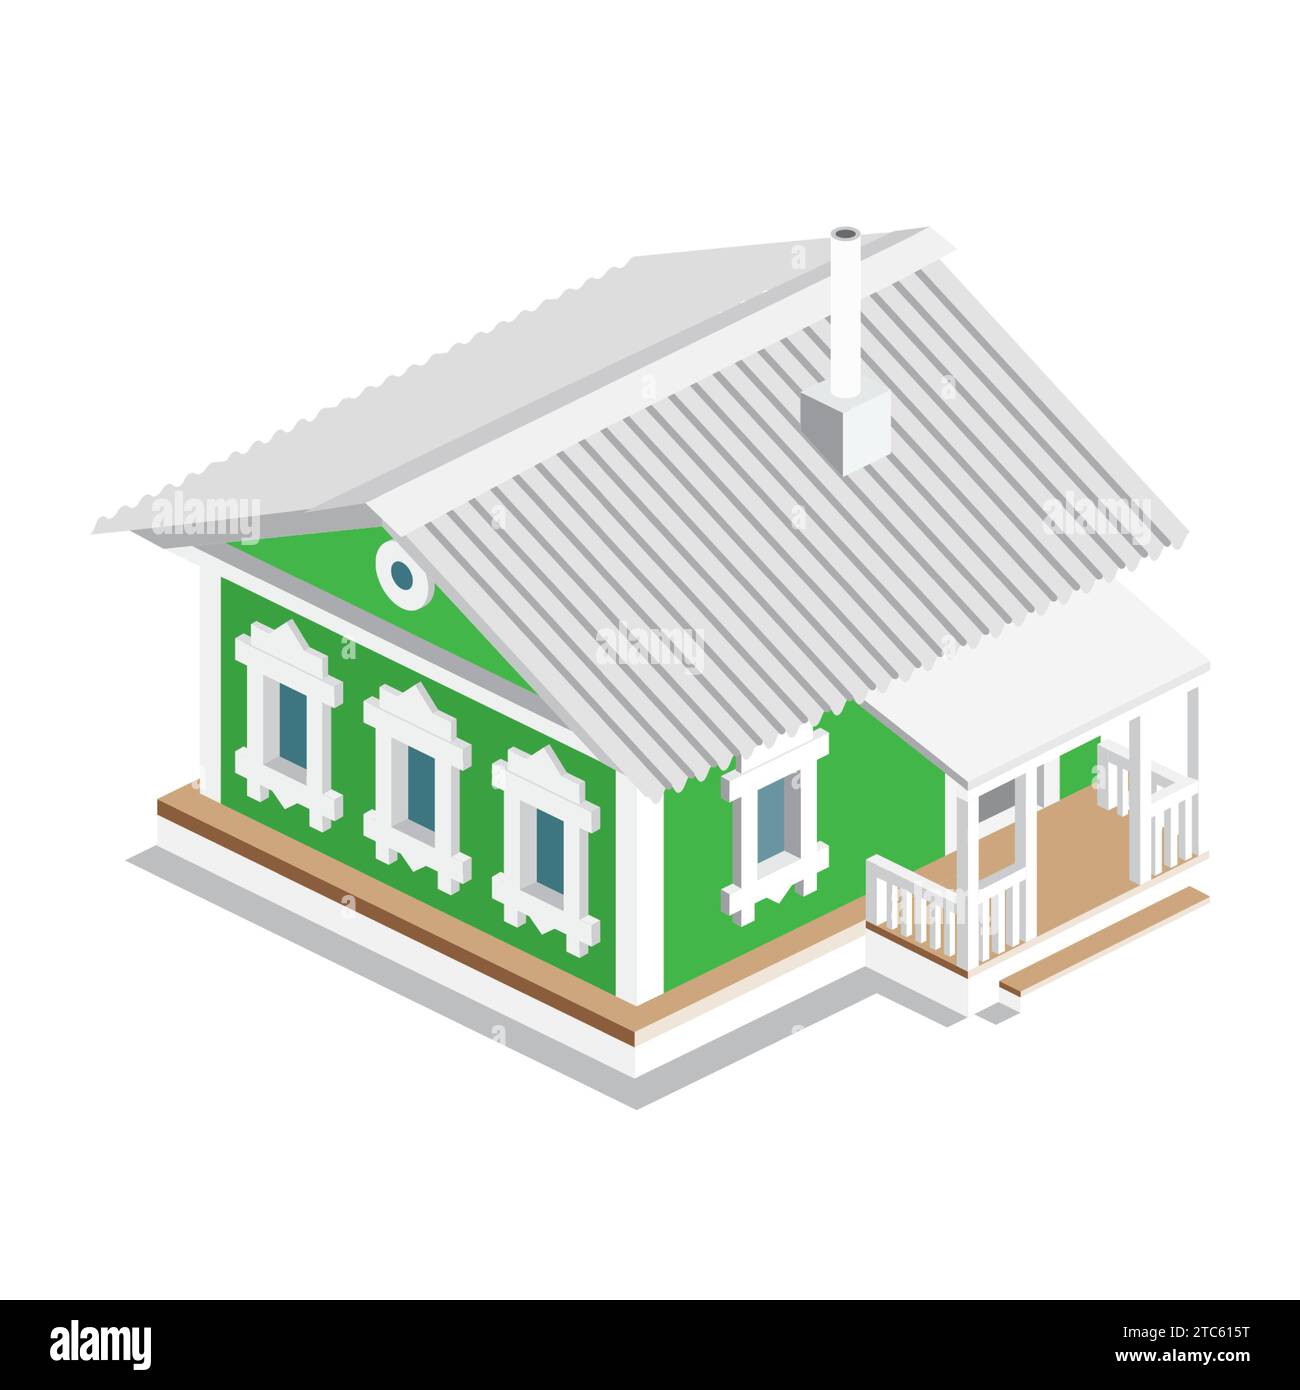 Isometric old russian rural house. Green building isolated on white background. Traditional authentic architectural style. Vector illustration. Stock Vector